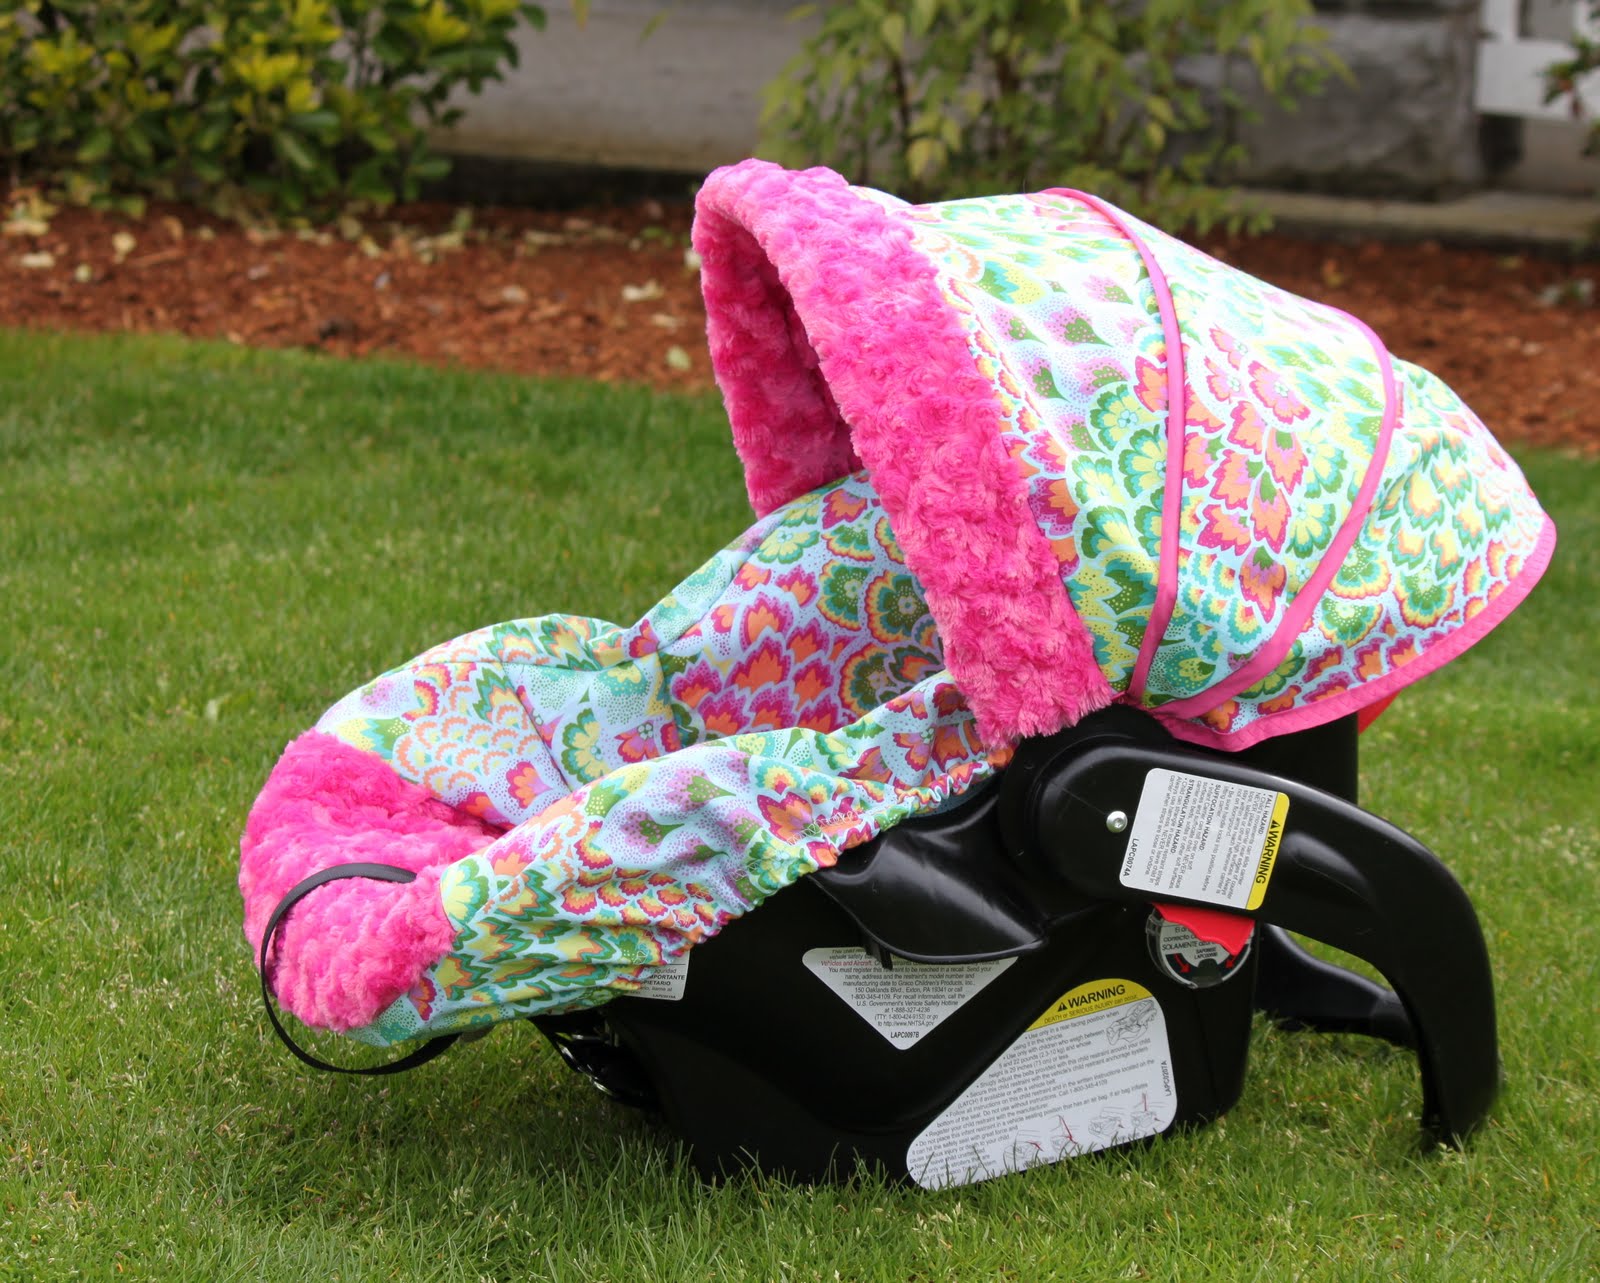 Universal Toddler Car Seat Cover Pattern - Make Them Yourself